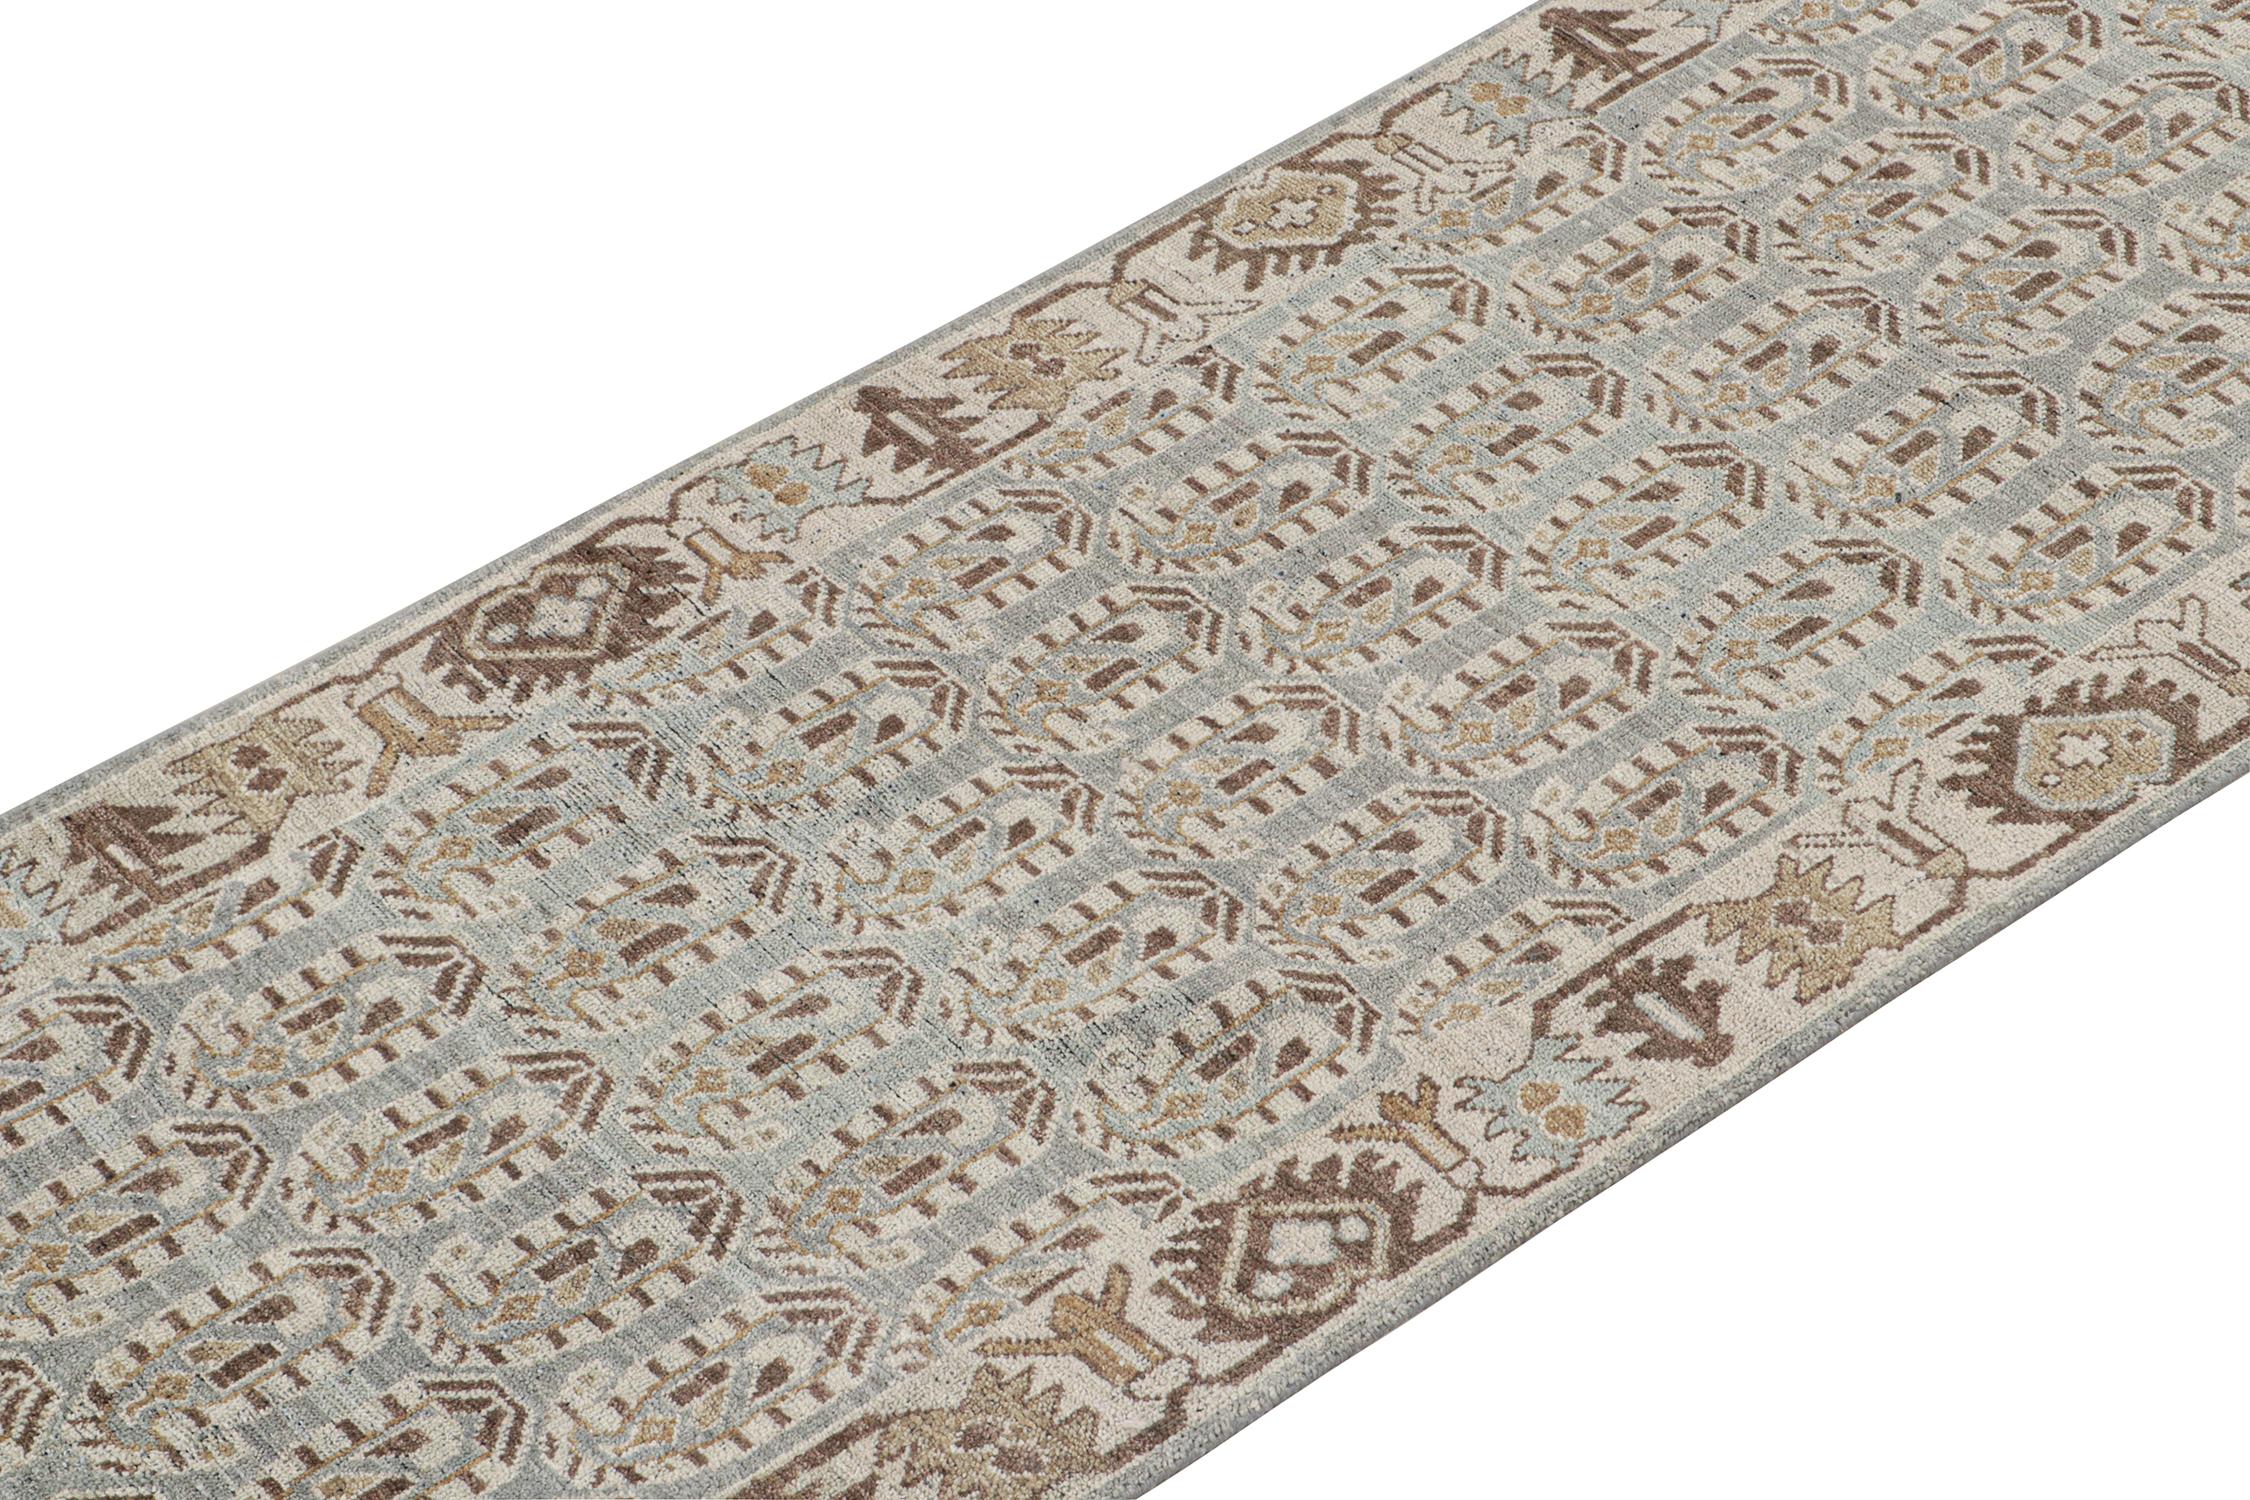 Indian Rug & Kilim’s Tribal-Style Custom Runner with Paisley Patterns For Sale